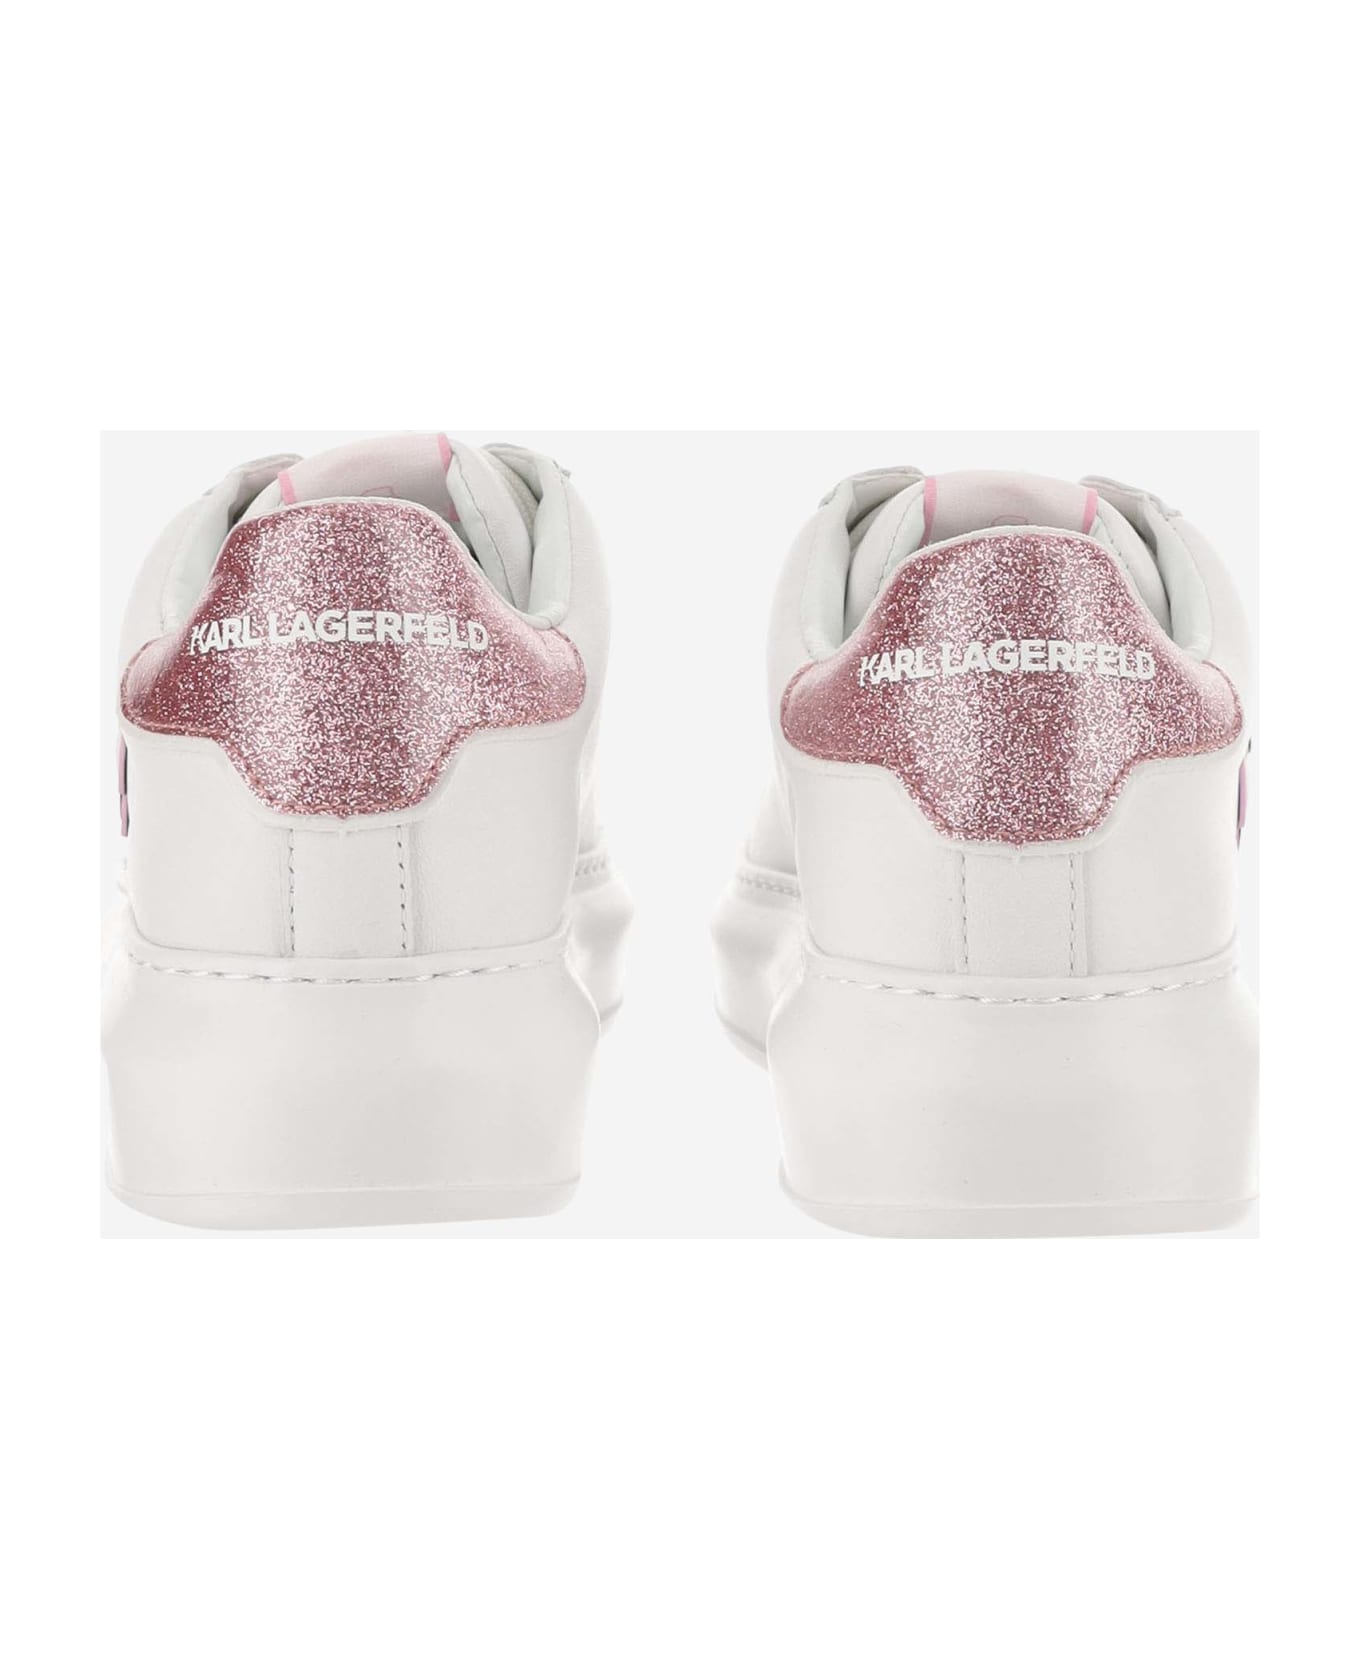 Karl Lagerfeld Leather Sneakers With Logo - White